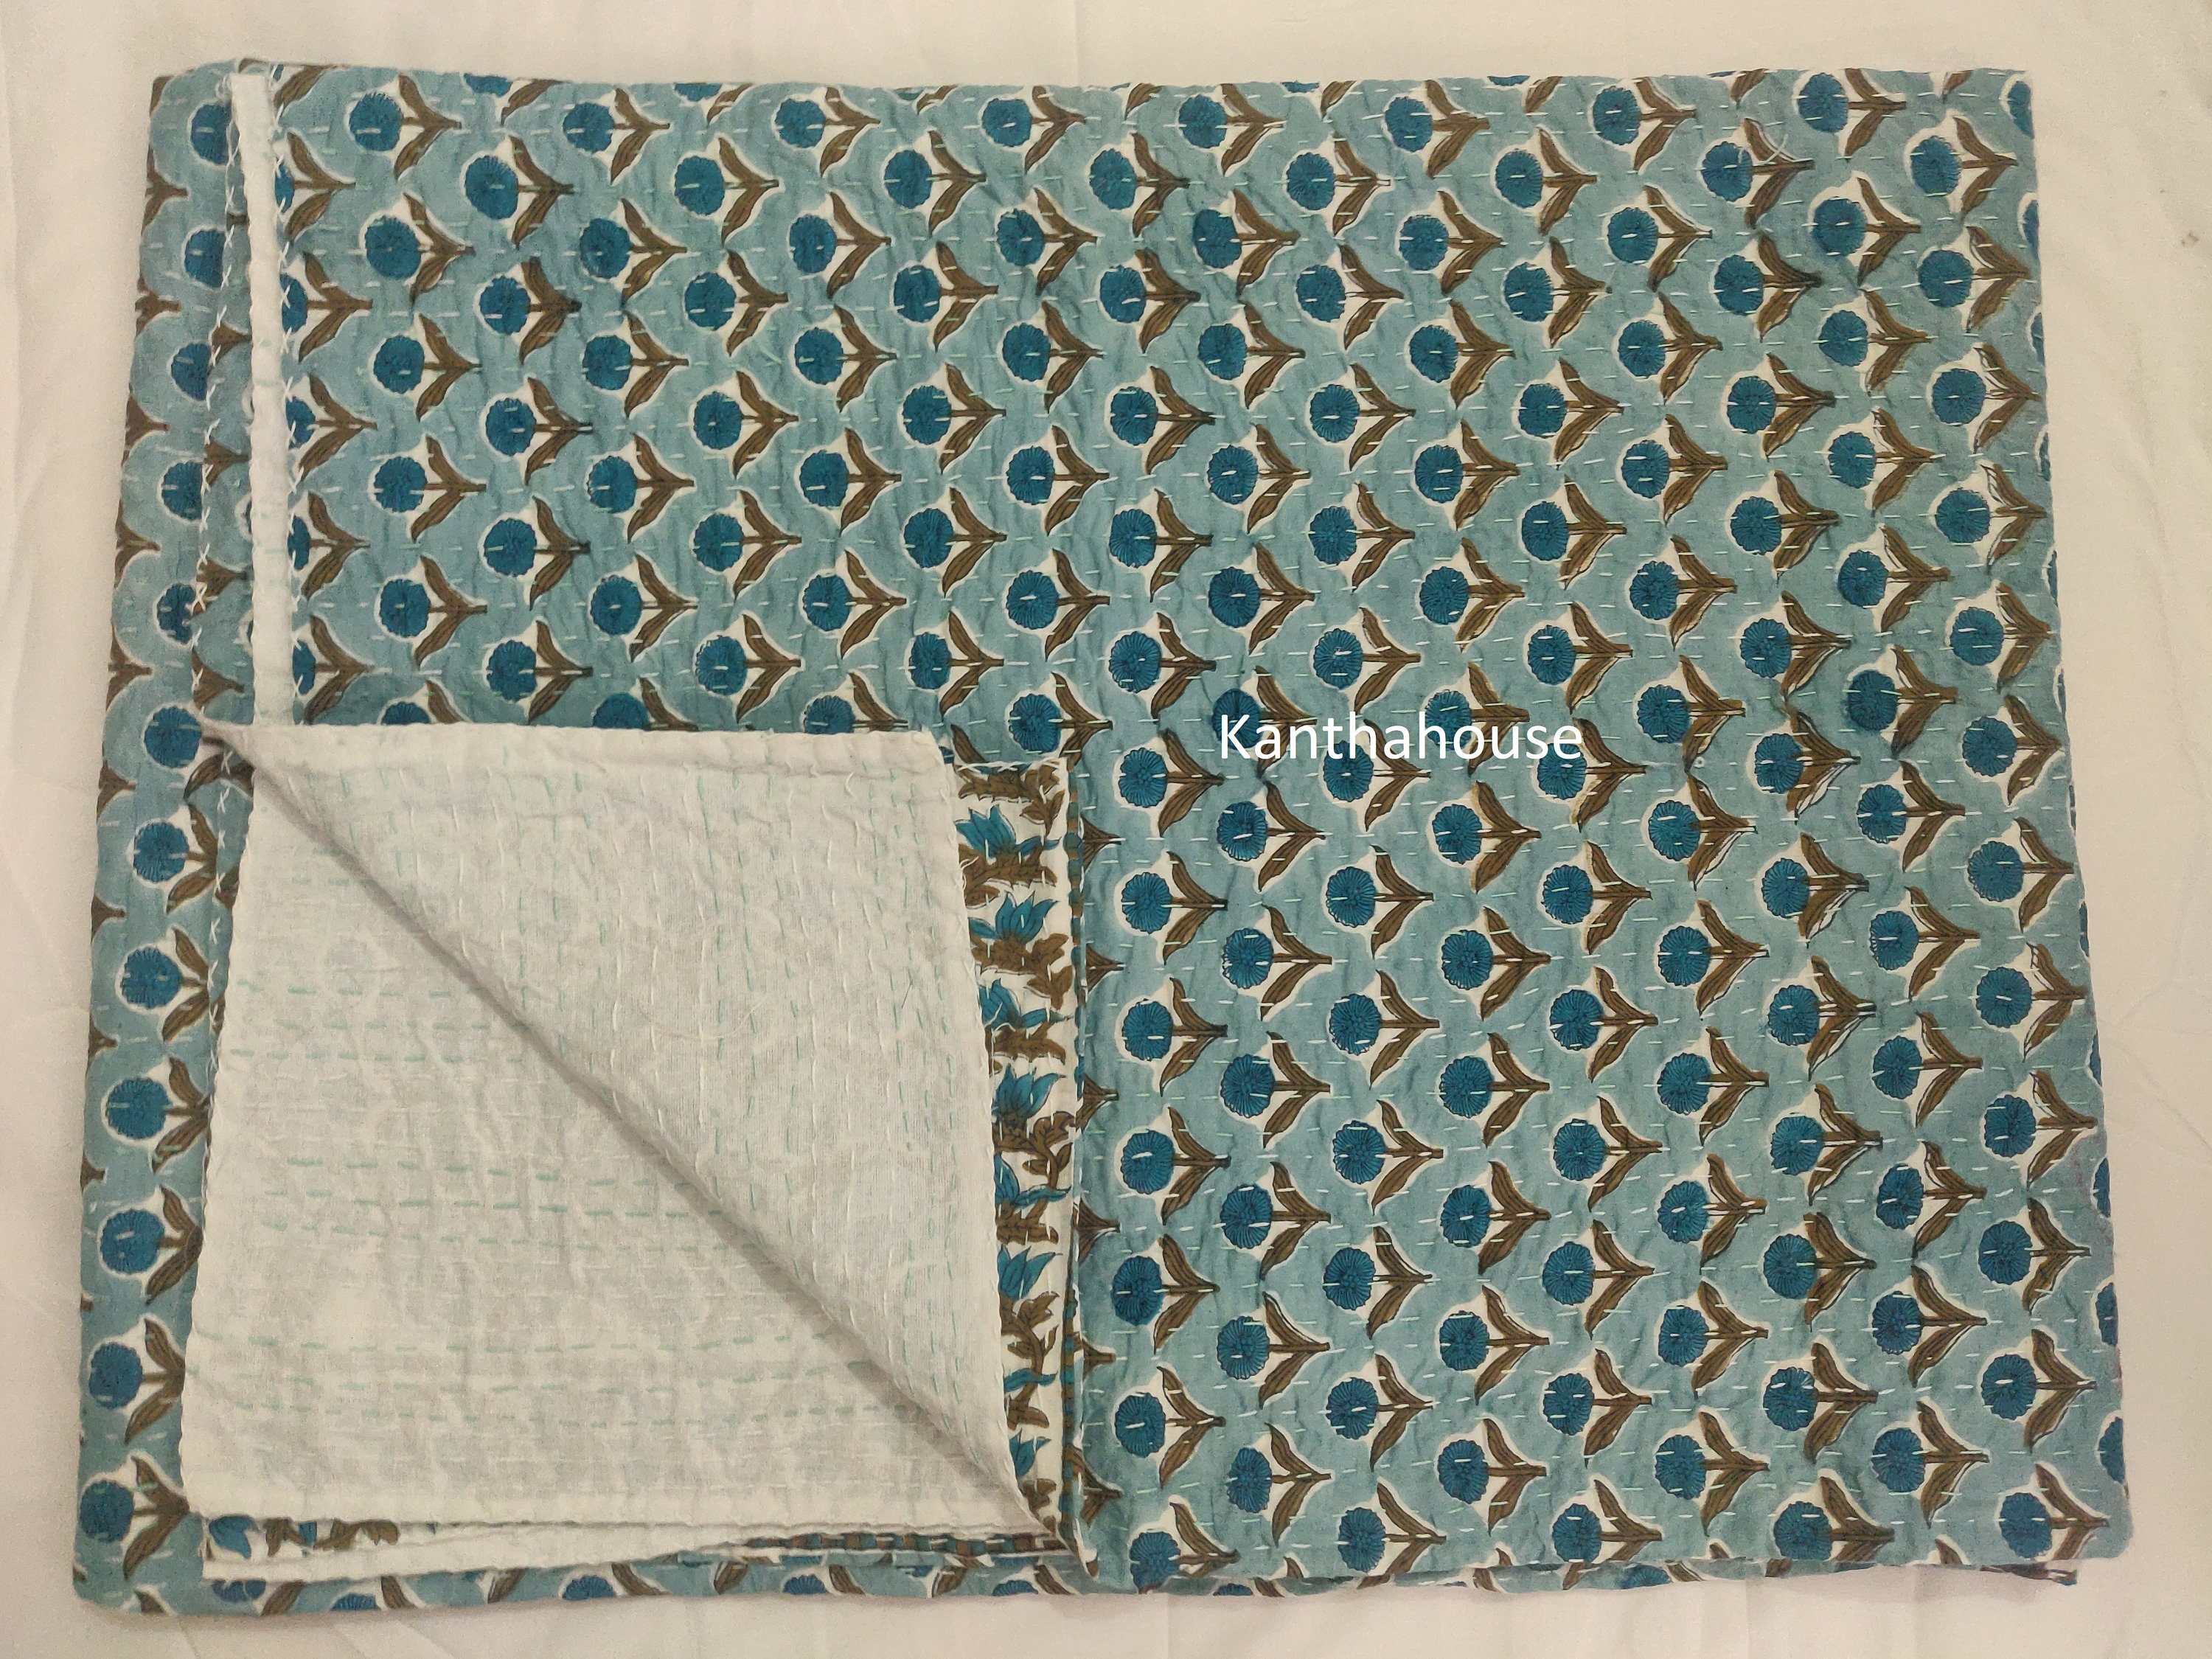 New Indian Kantha Quilt Floral Butti Print Kantha Bed Cover - Etsy ...